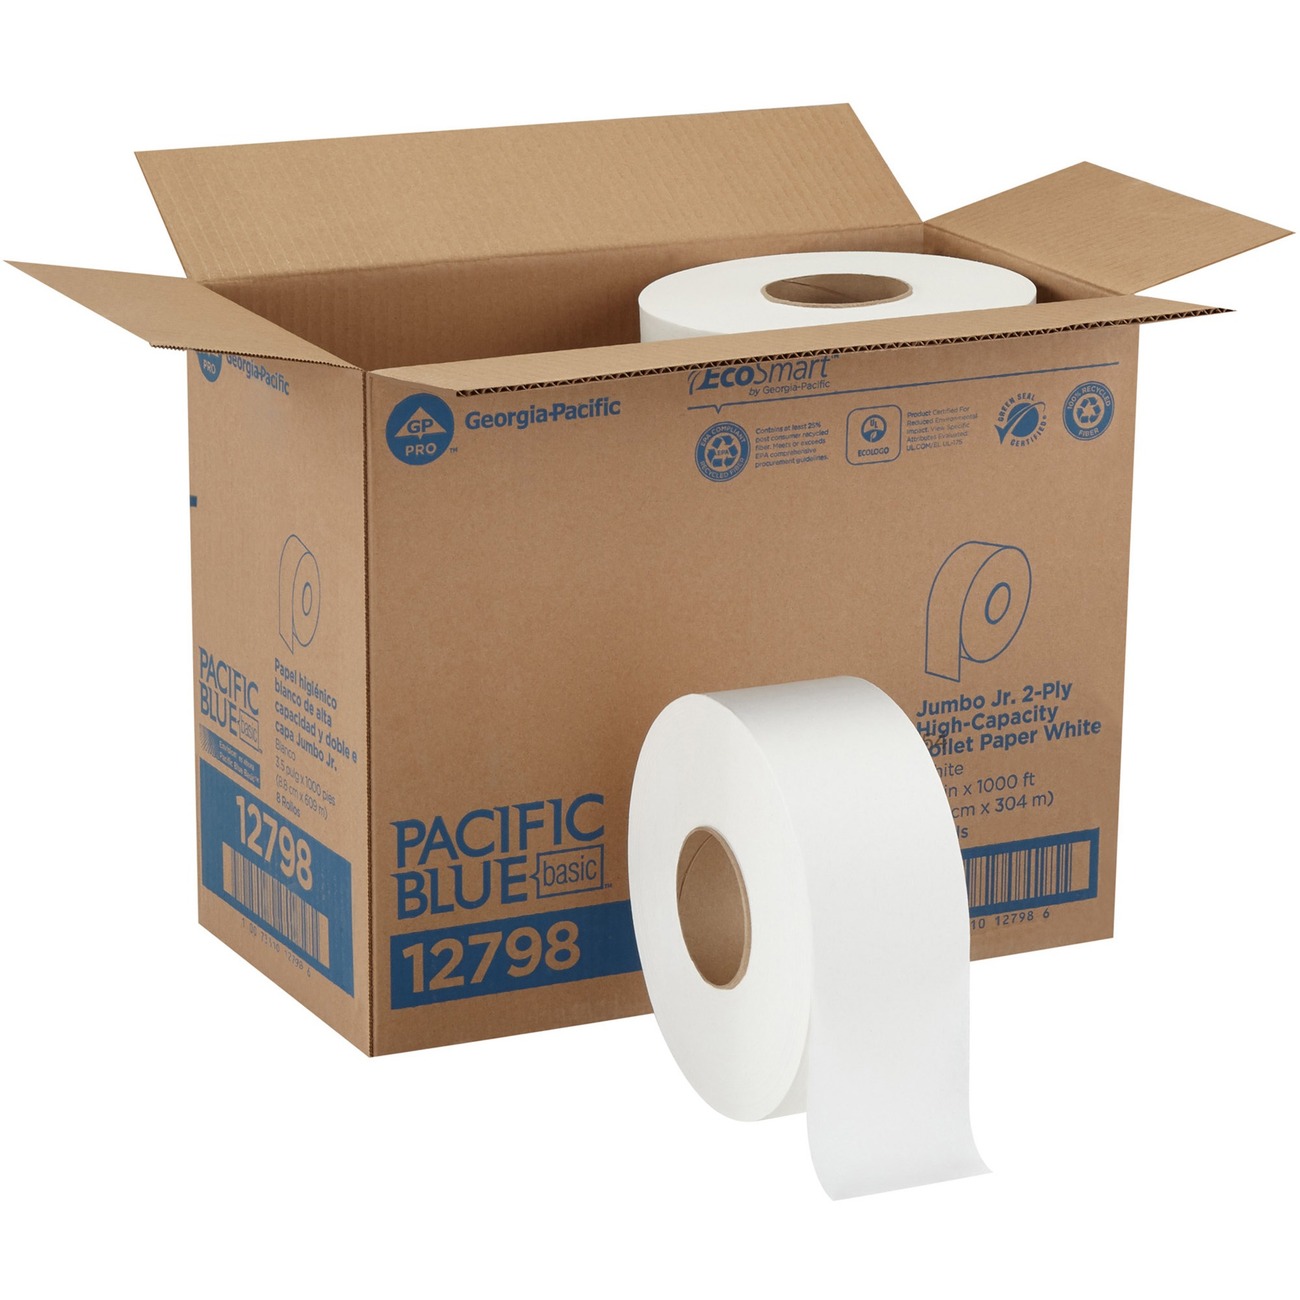 GEORGIA-PACIFIC 16560 Toilet Paper,AngelSoft psUltra ,PK60 R 